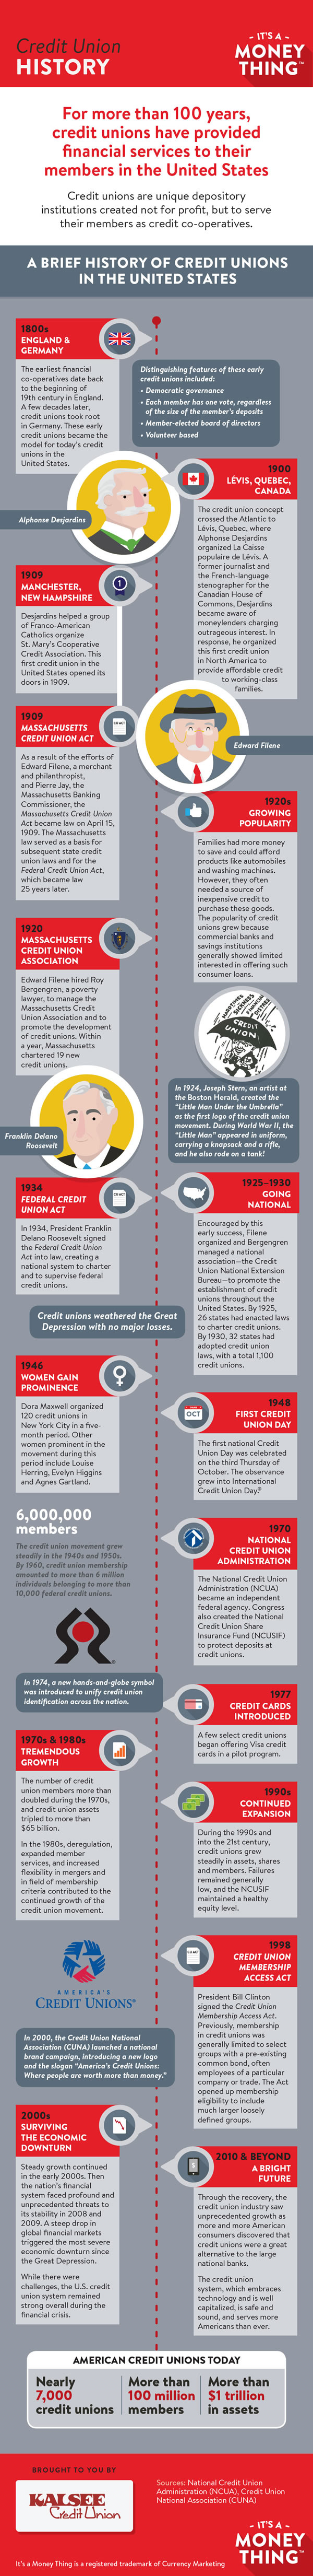 Credit Union History infographic, click for transcription